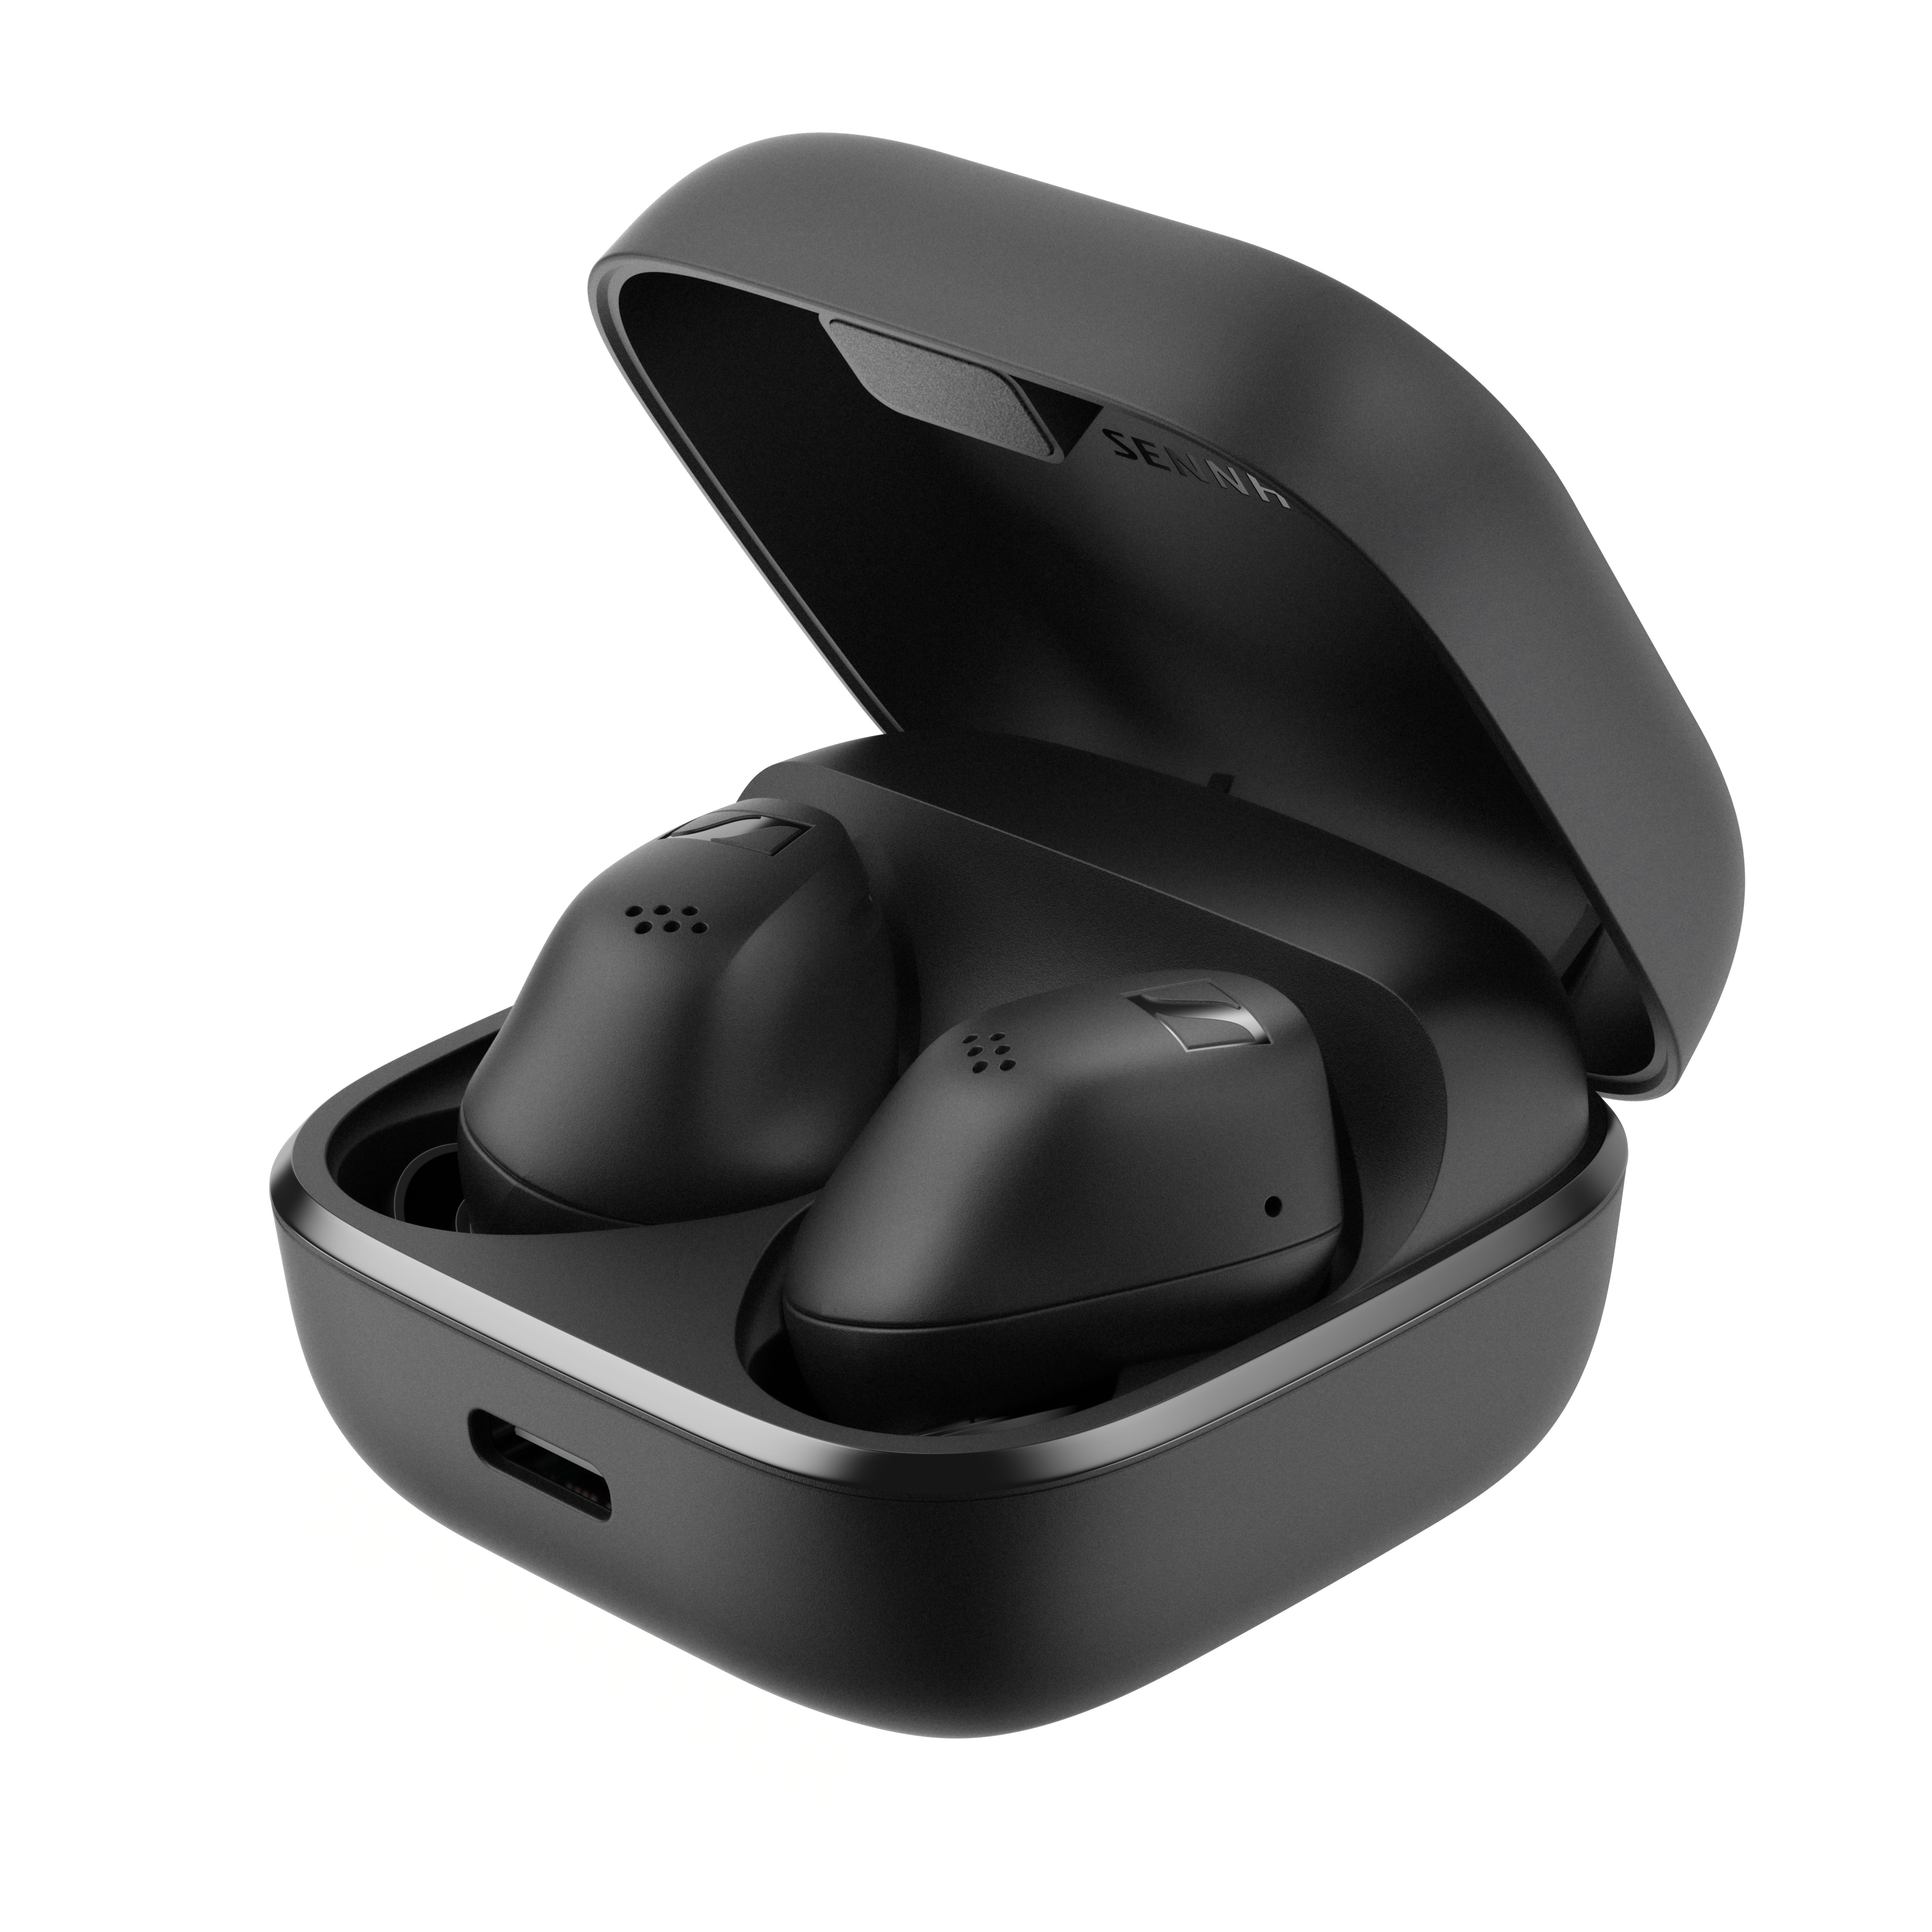 Pictured: ACCENTUM True Wireless in its compact Qi-enabled charging case